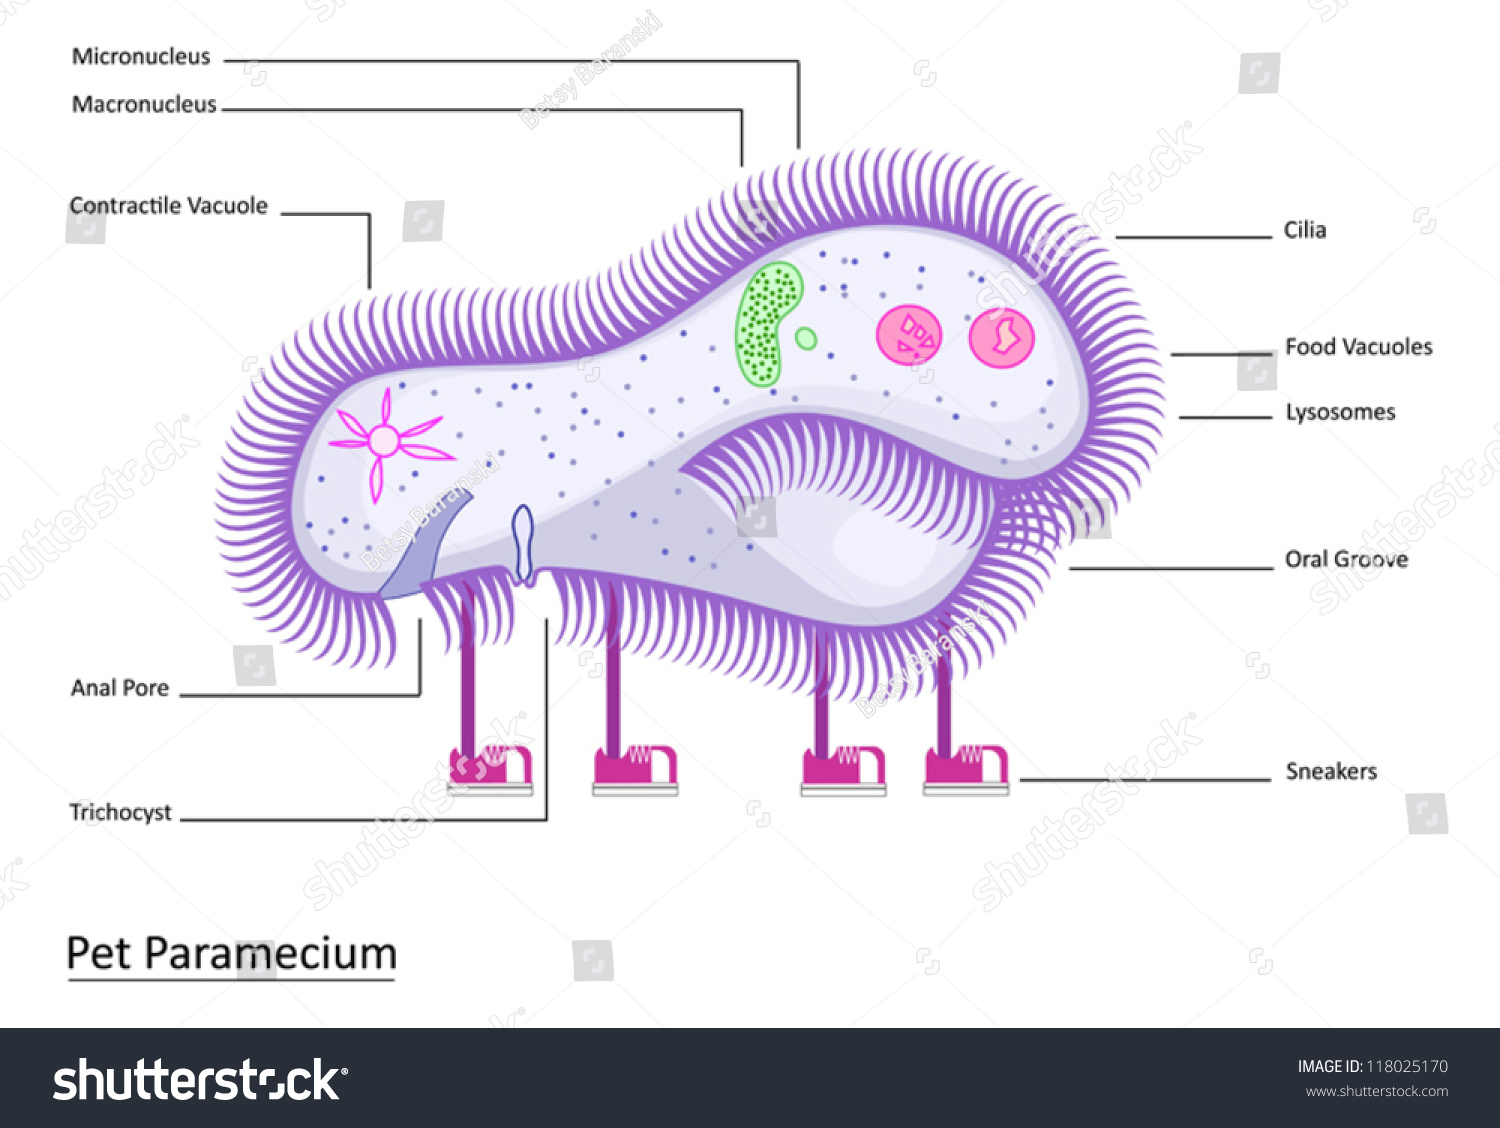 Colorful Vector Illustration Of A Single-Celled Pet Paramecium With ...